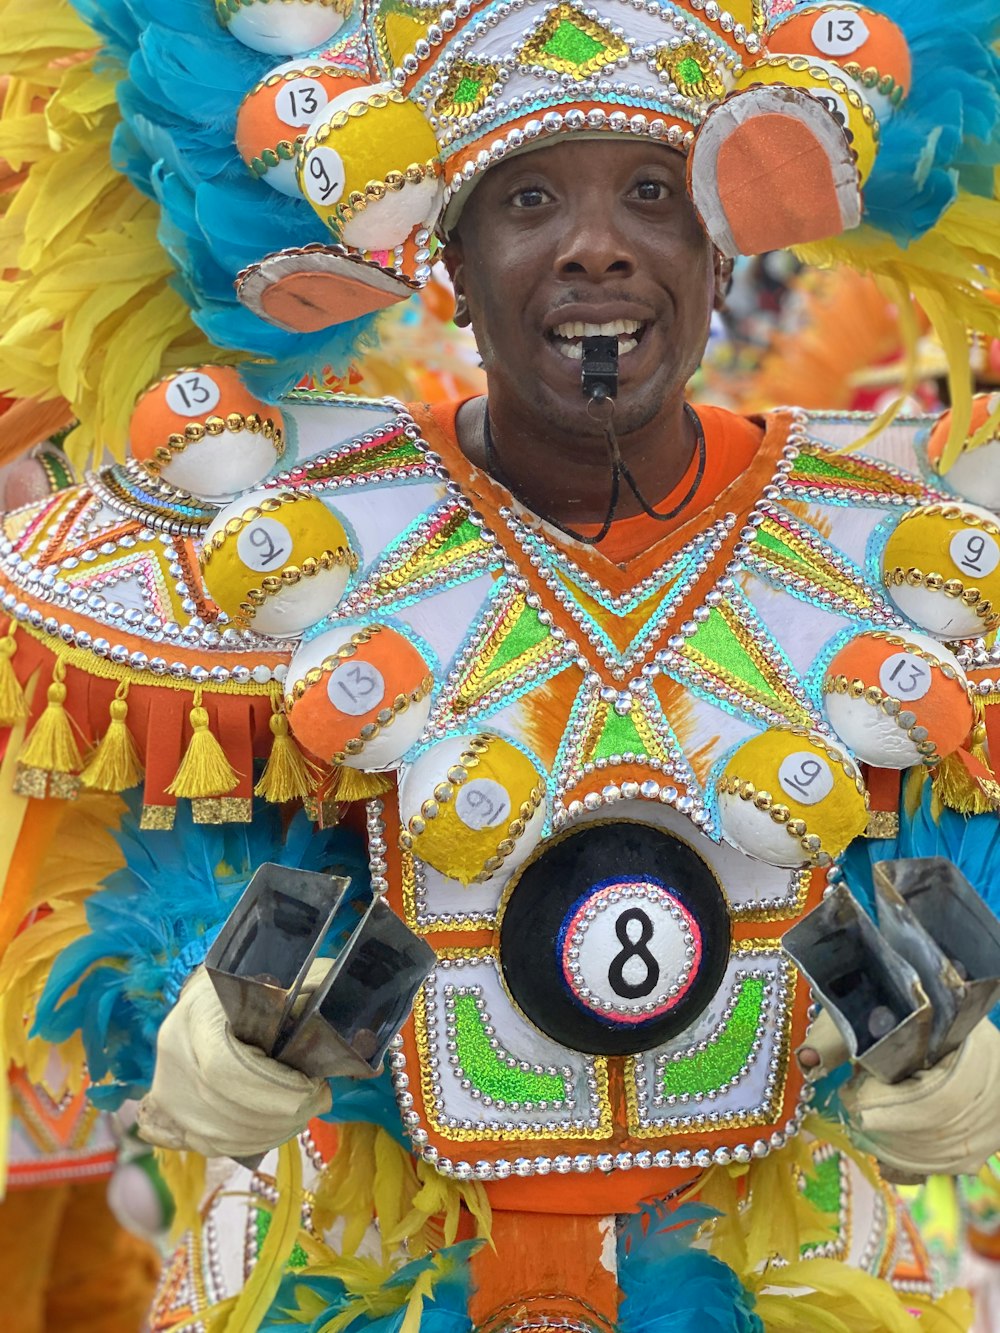 man wearing white, green, and orange costume with number 8 tag